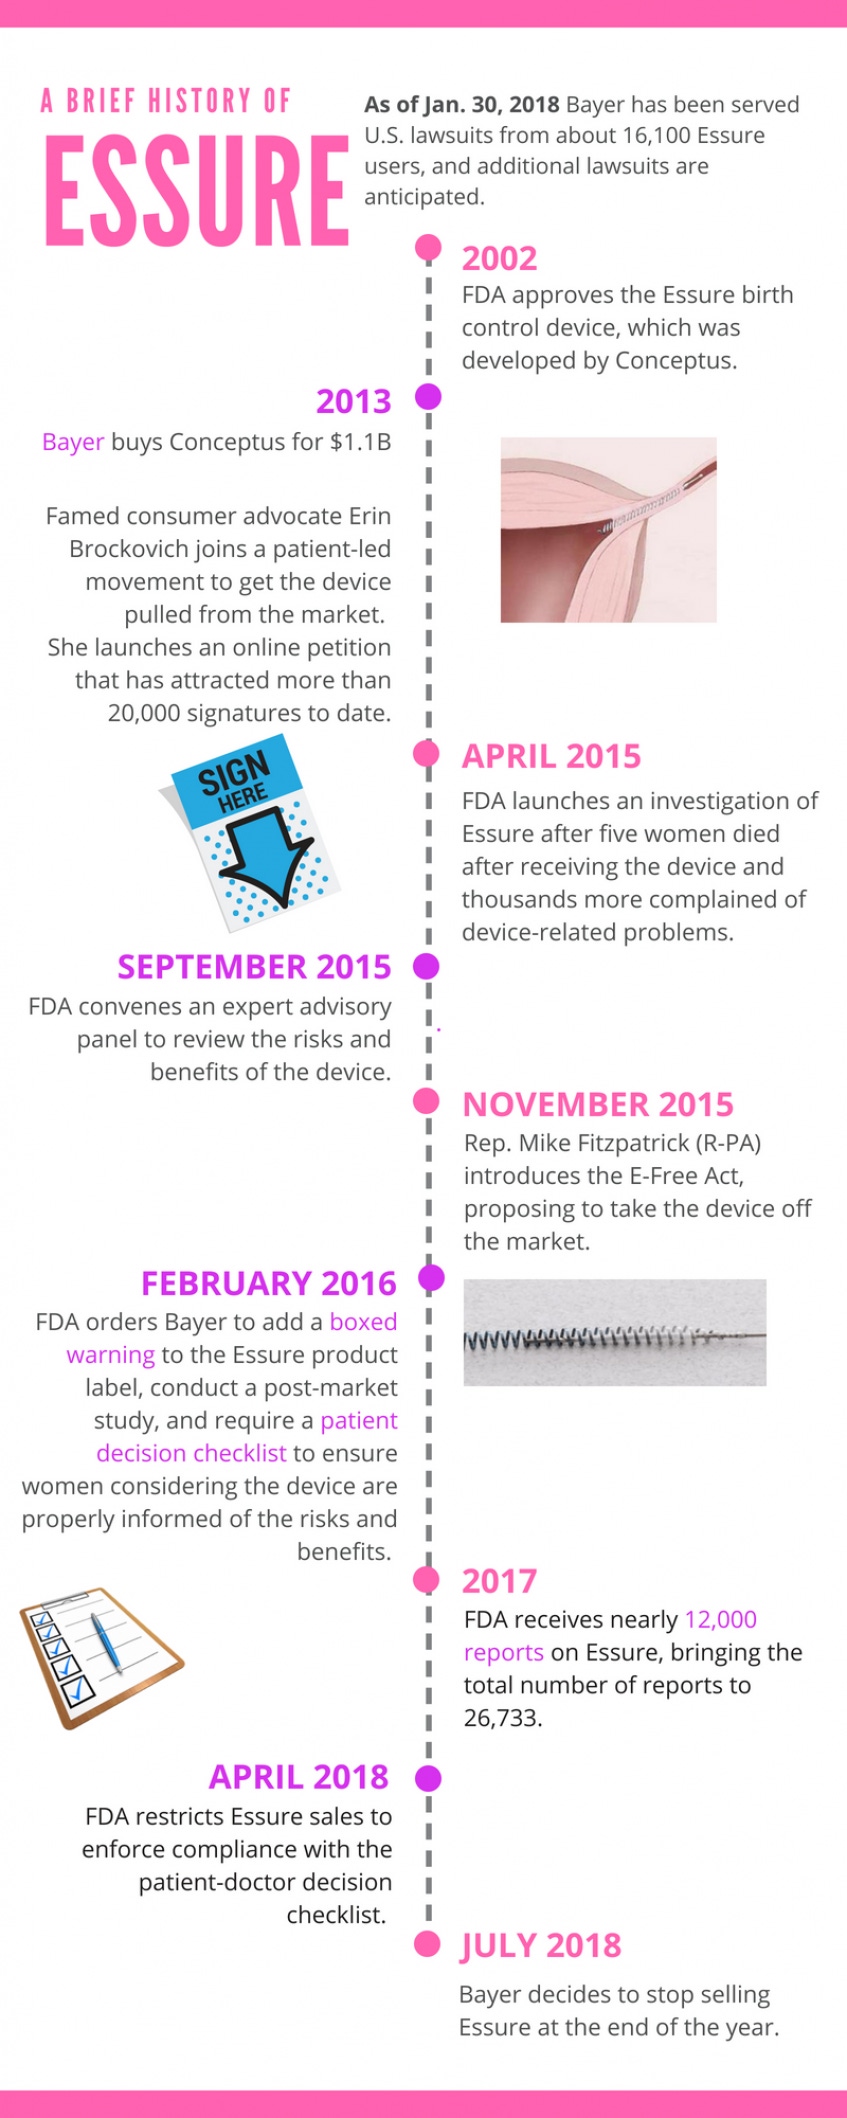 FDA Received 6,000 Reports About Essure in 2018